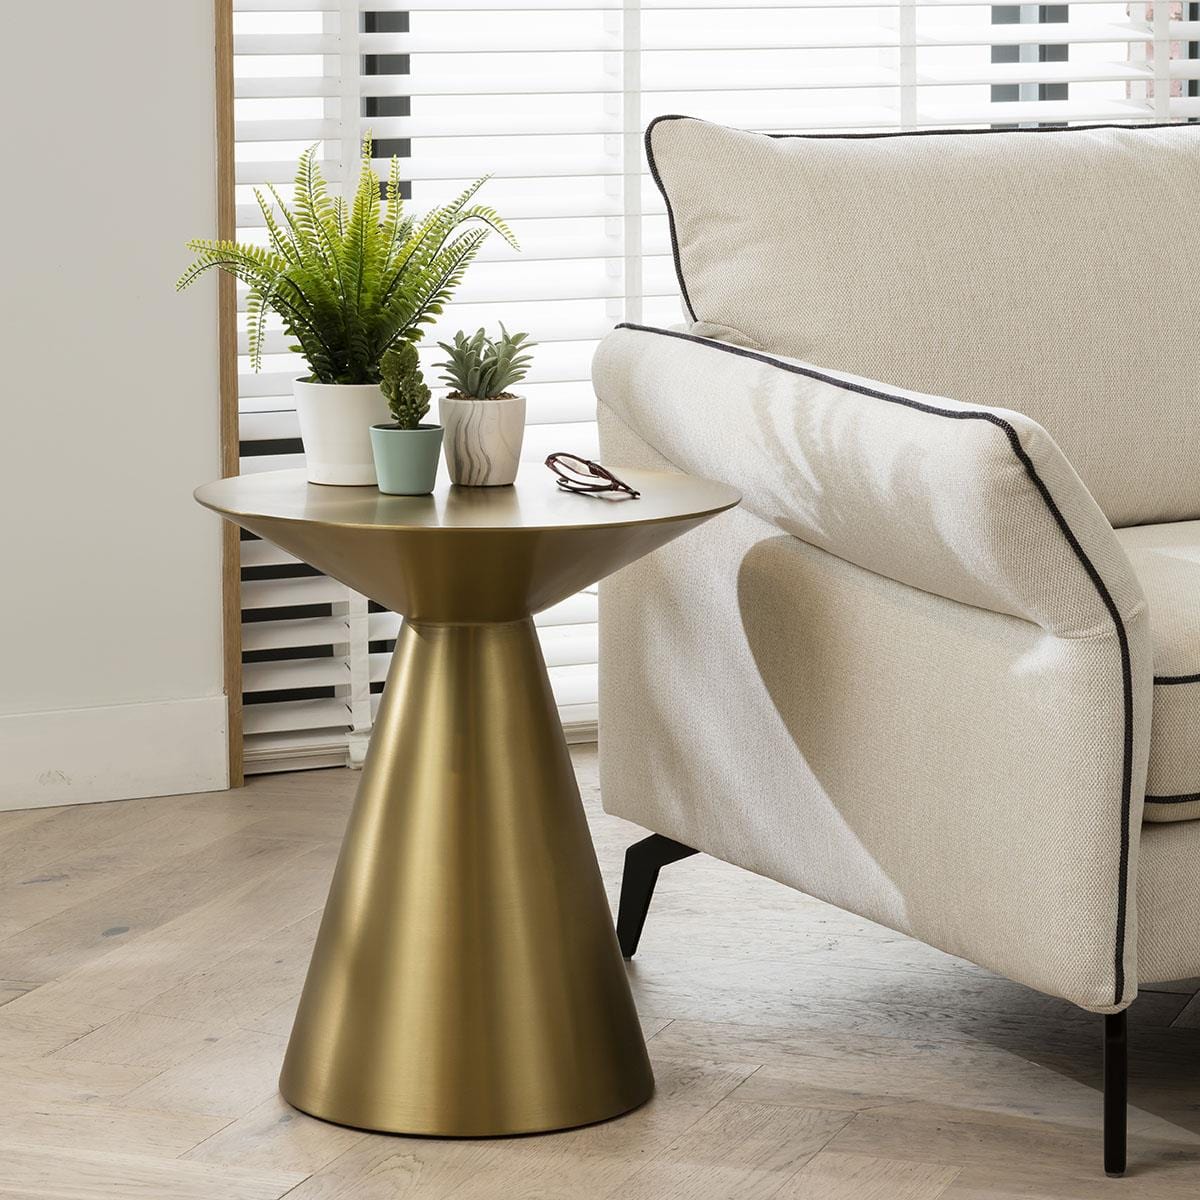 Quatropi Retro-inspired Metal Side Table - Gold Coned Shape Round Accent Lamp Table 50cm